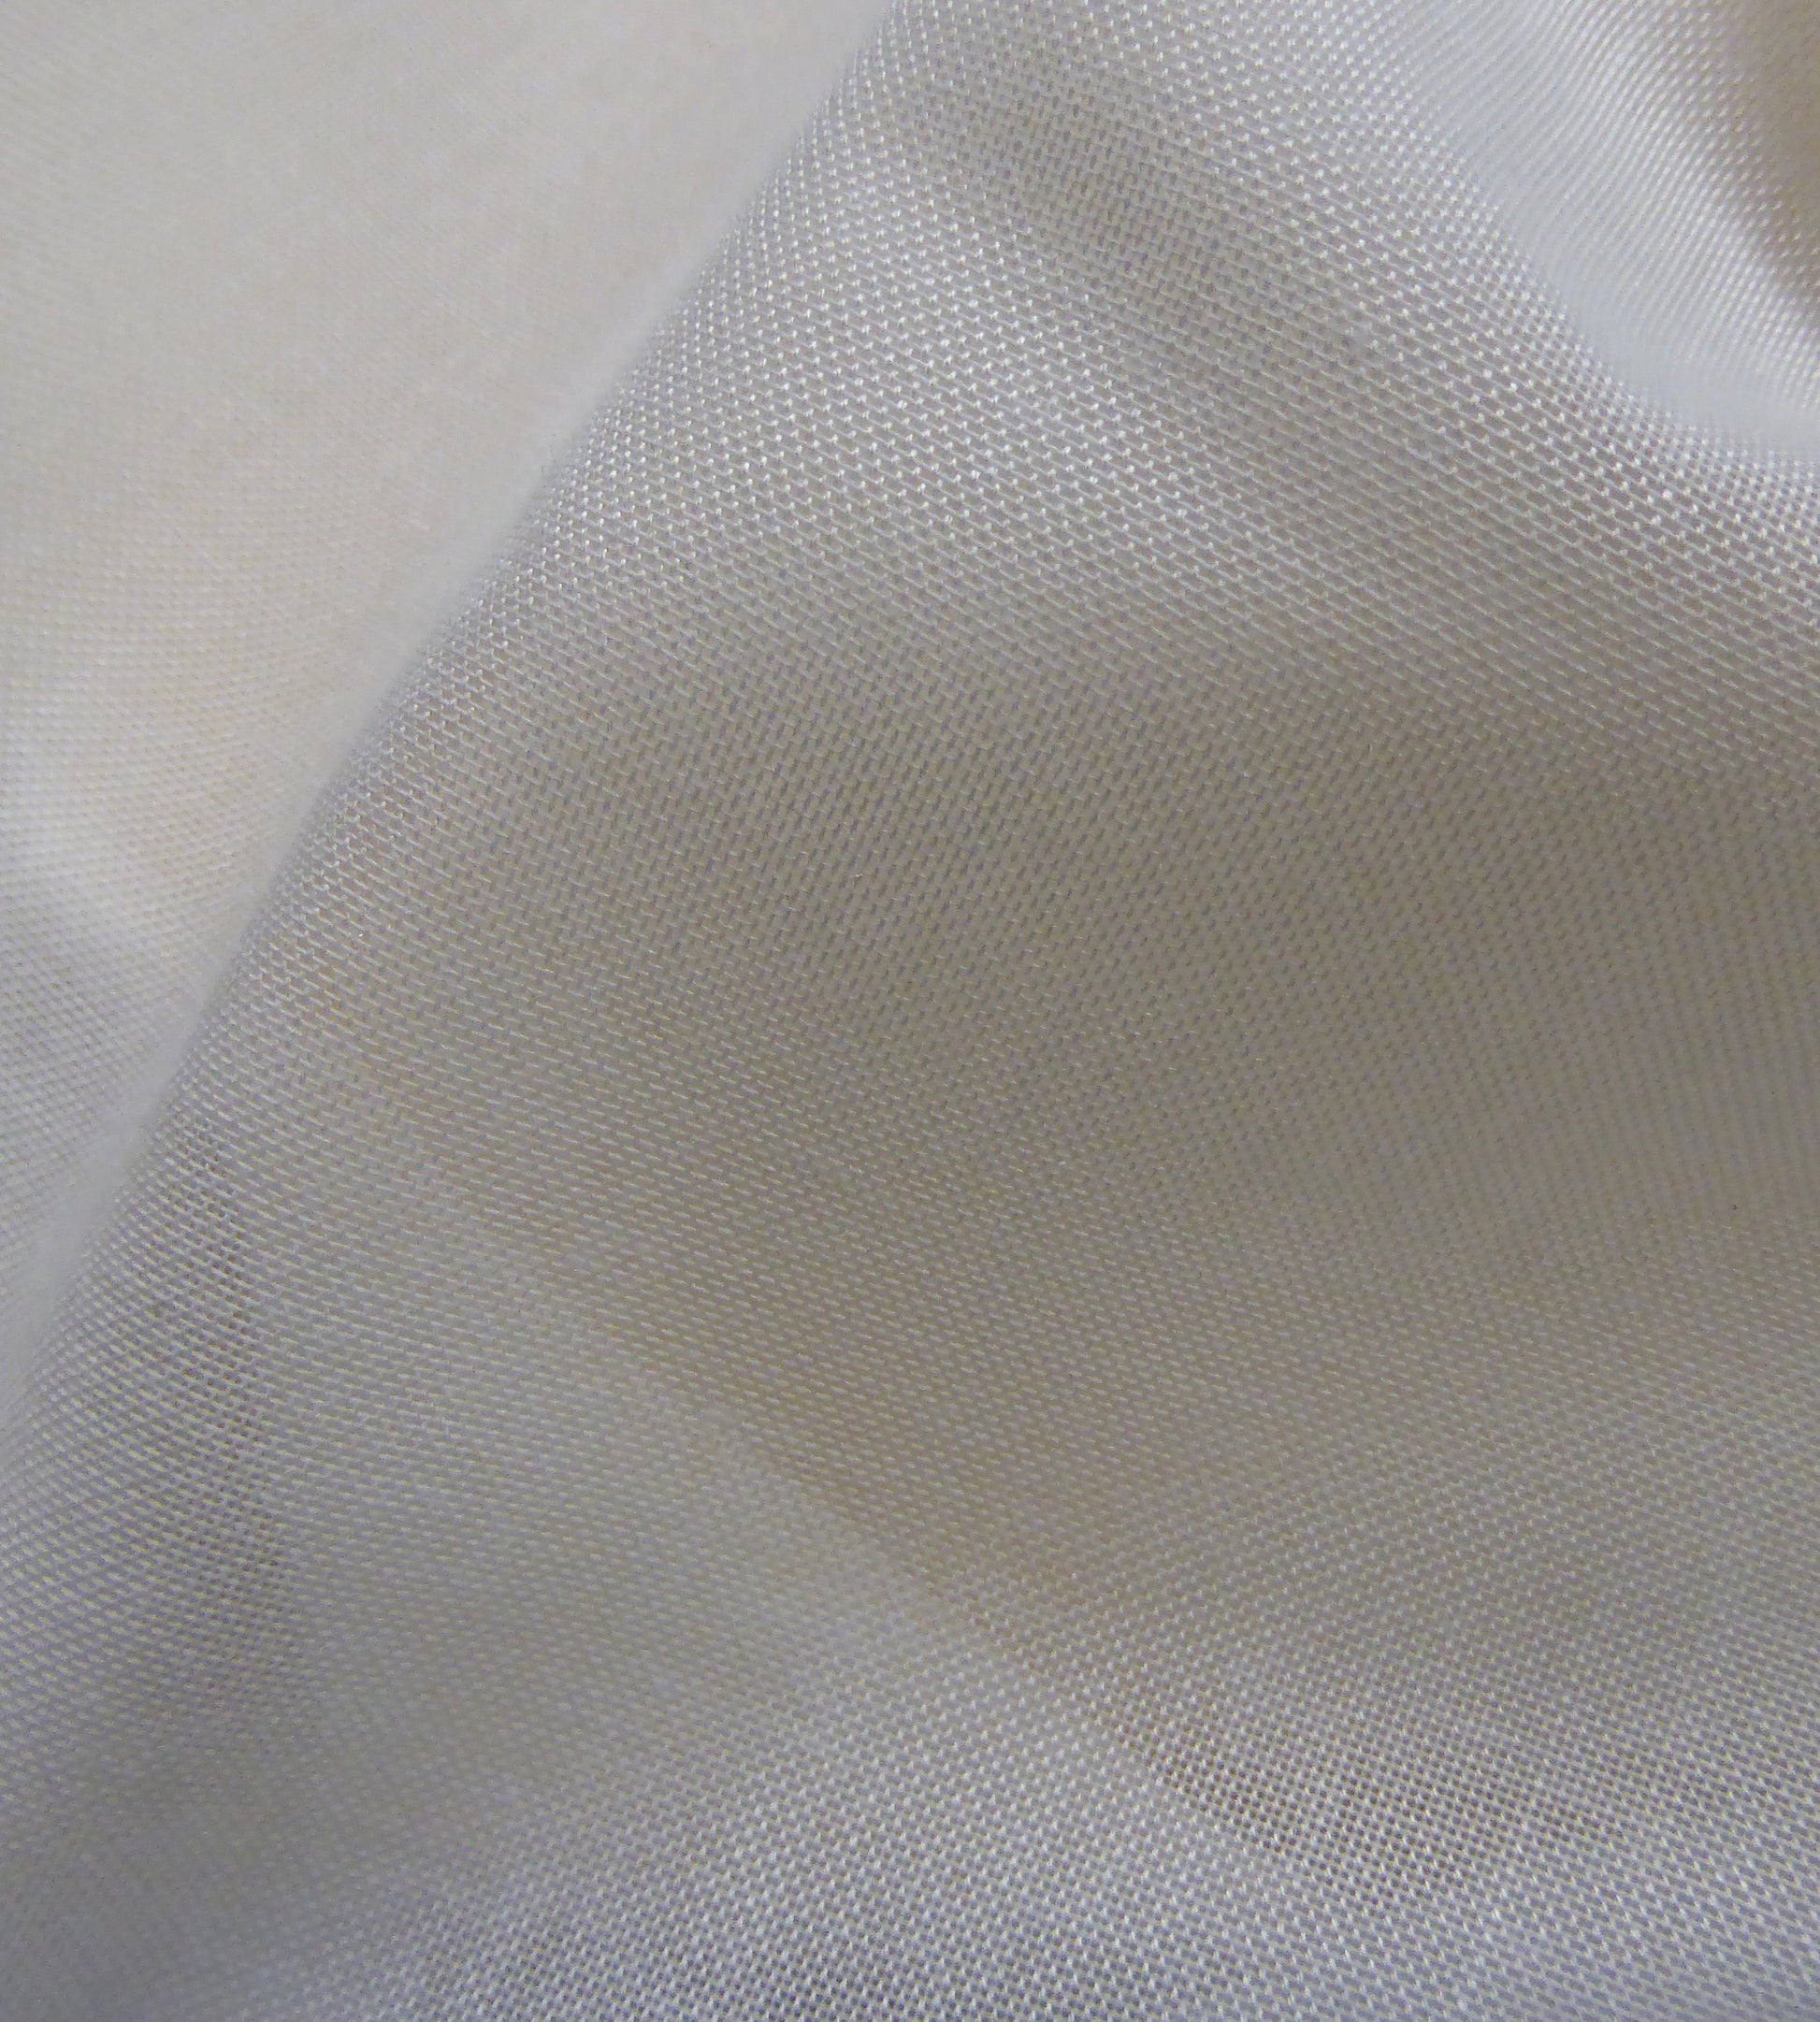 Purchase Old World Weavers Fabric SKU FT 00200203, Voile Etamine M1 Champagne 1